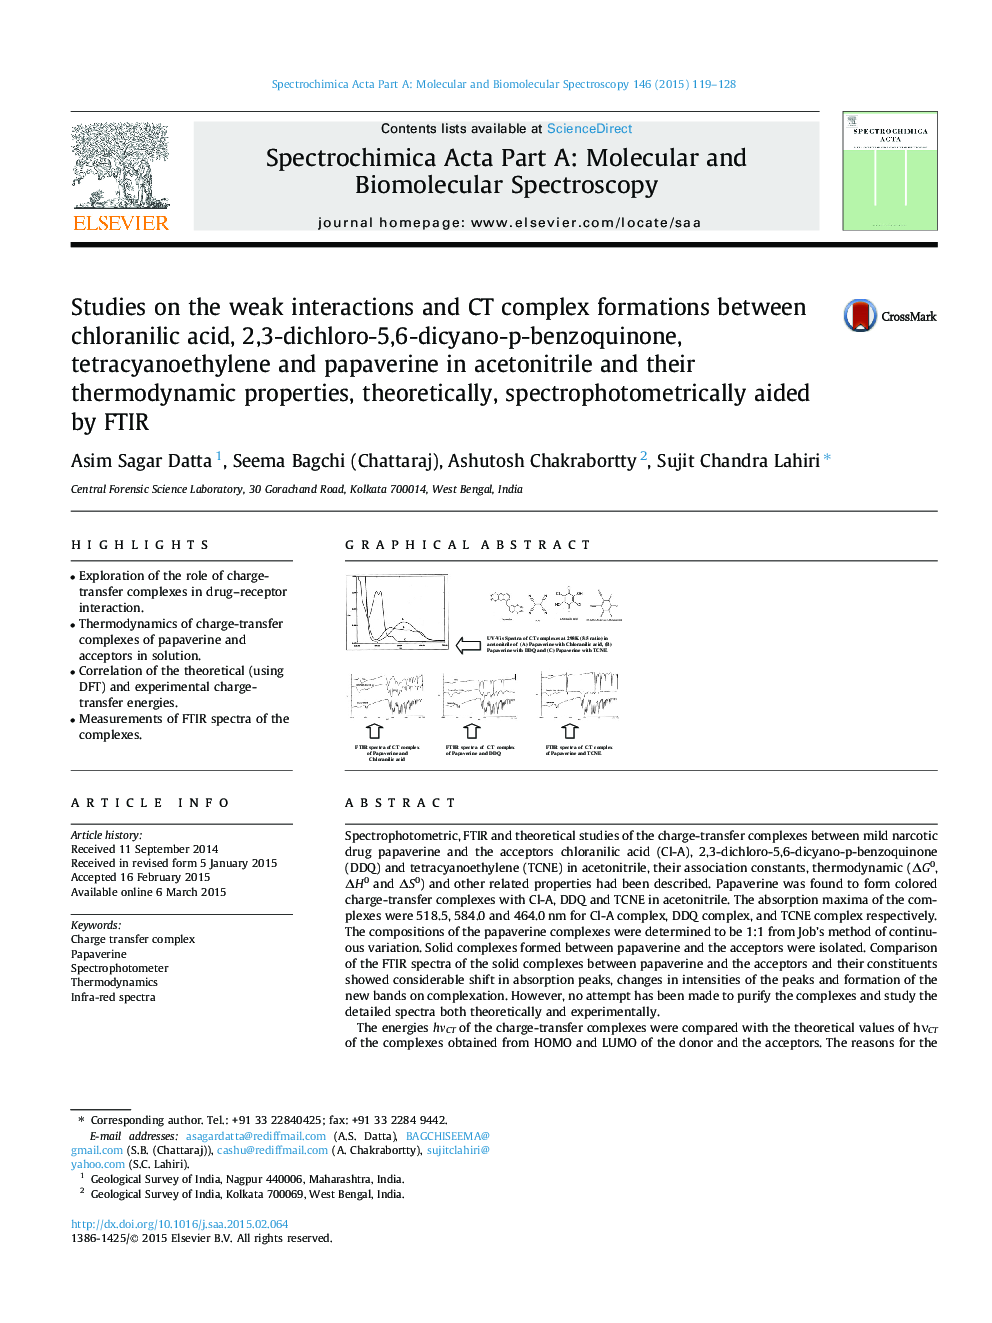 Studies on the weak interactions and CT complex formations between chloranilic acid, 2,3-dichloro-5,6-dicyano-p-benzoquinone, tetracyanoethylene and papaverine in acetonitrile and their thermodynamic properties, theoretically, spectrophotometrically aided